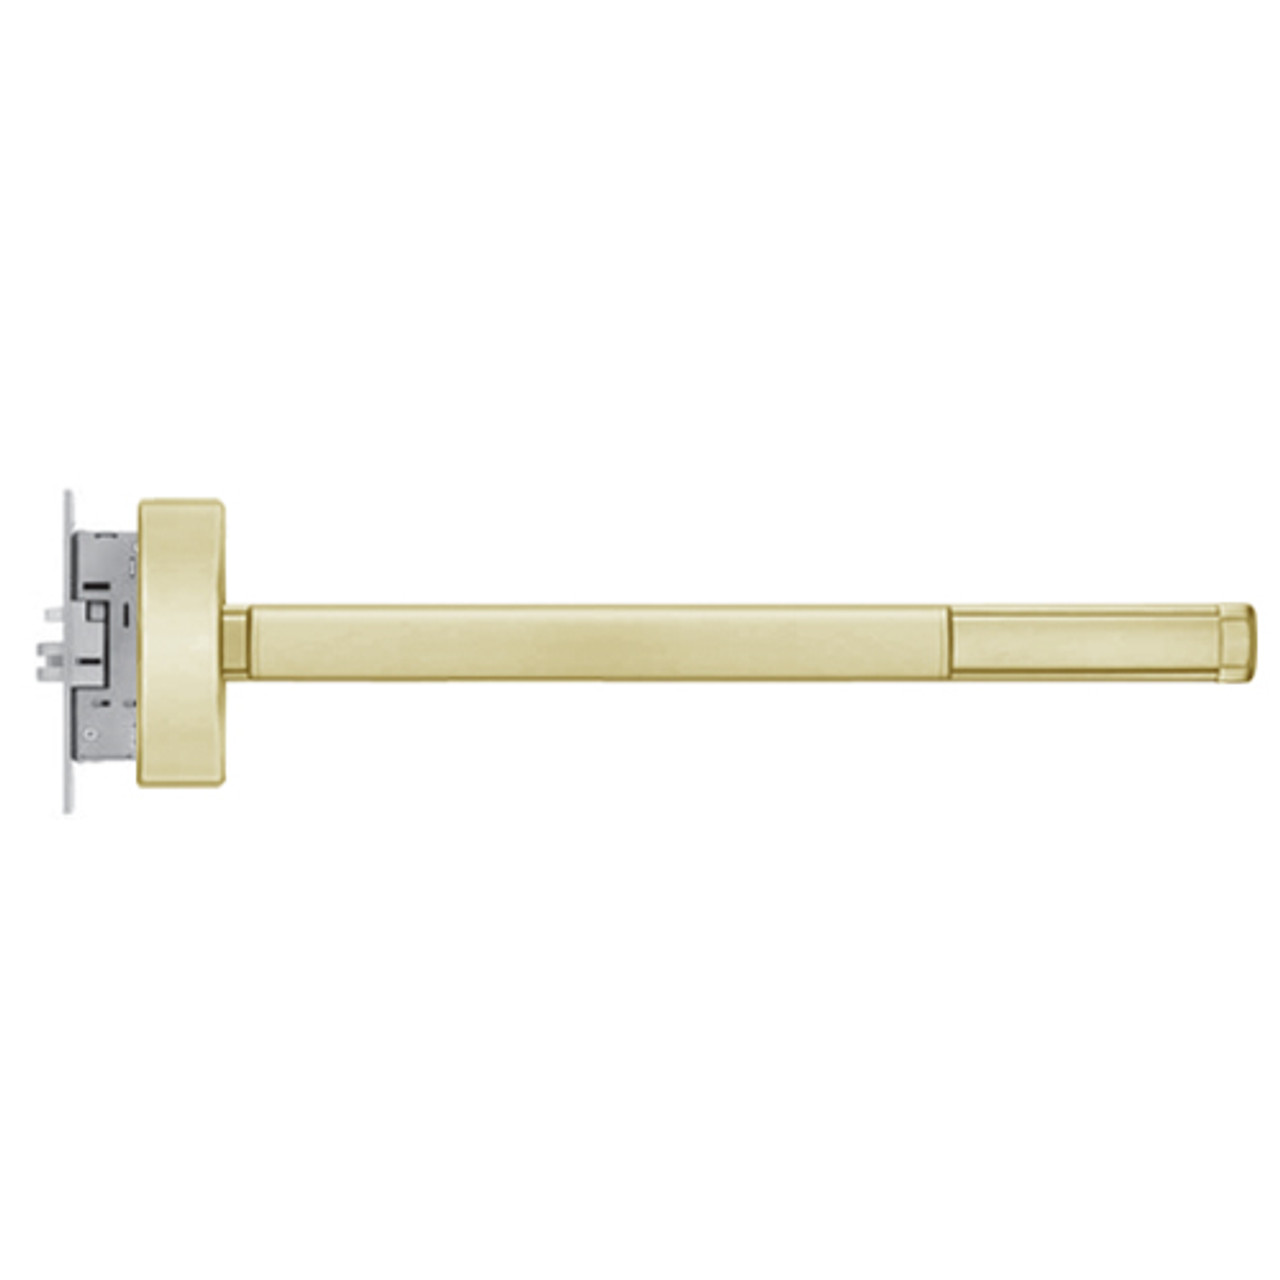 ELR2305-RHR-606-36 PHI 2300 Series Apex Mortise Exit Device with Electric Latch Retraction Prepped for Key Controls Thumb Piece in Satin Brass Finish